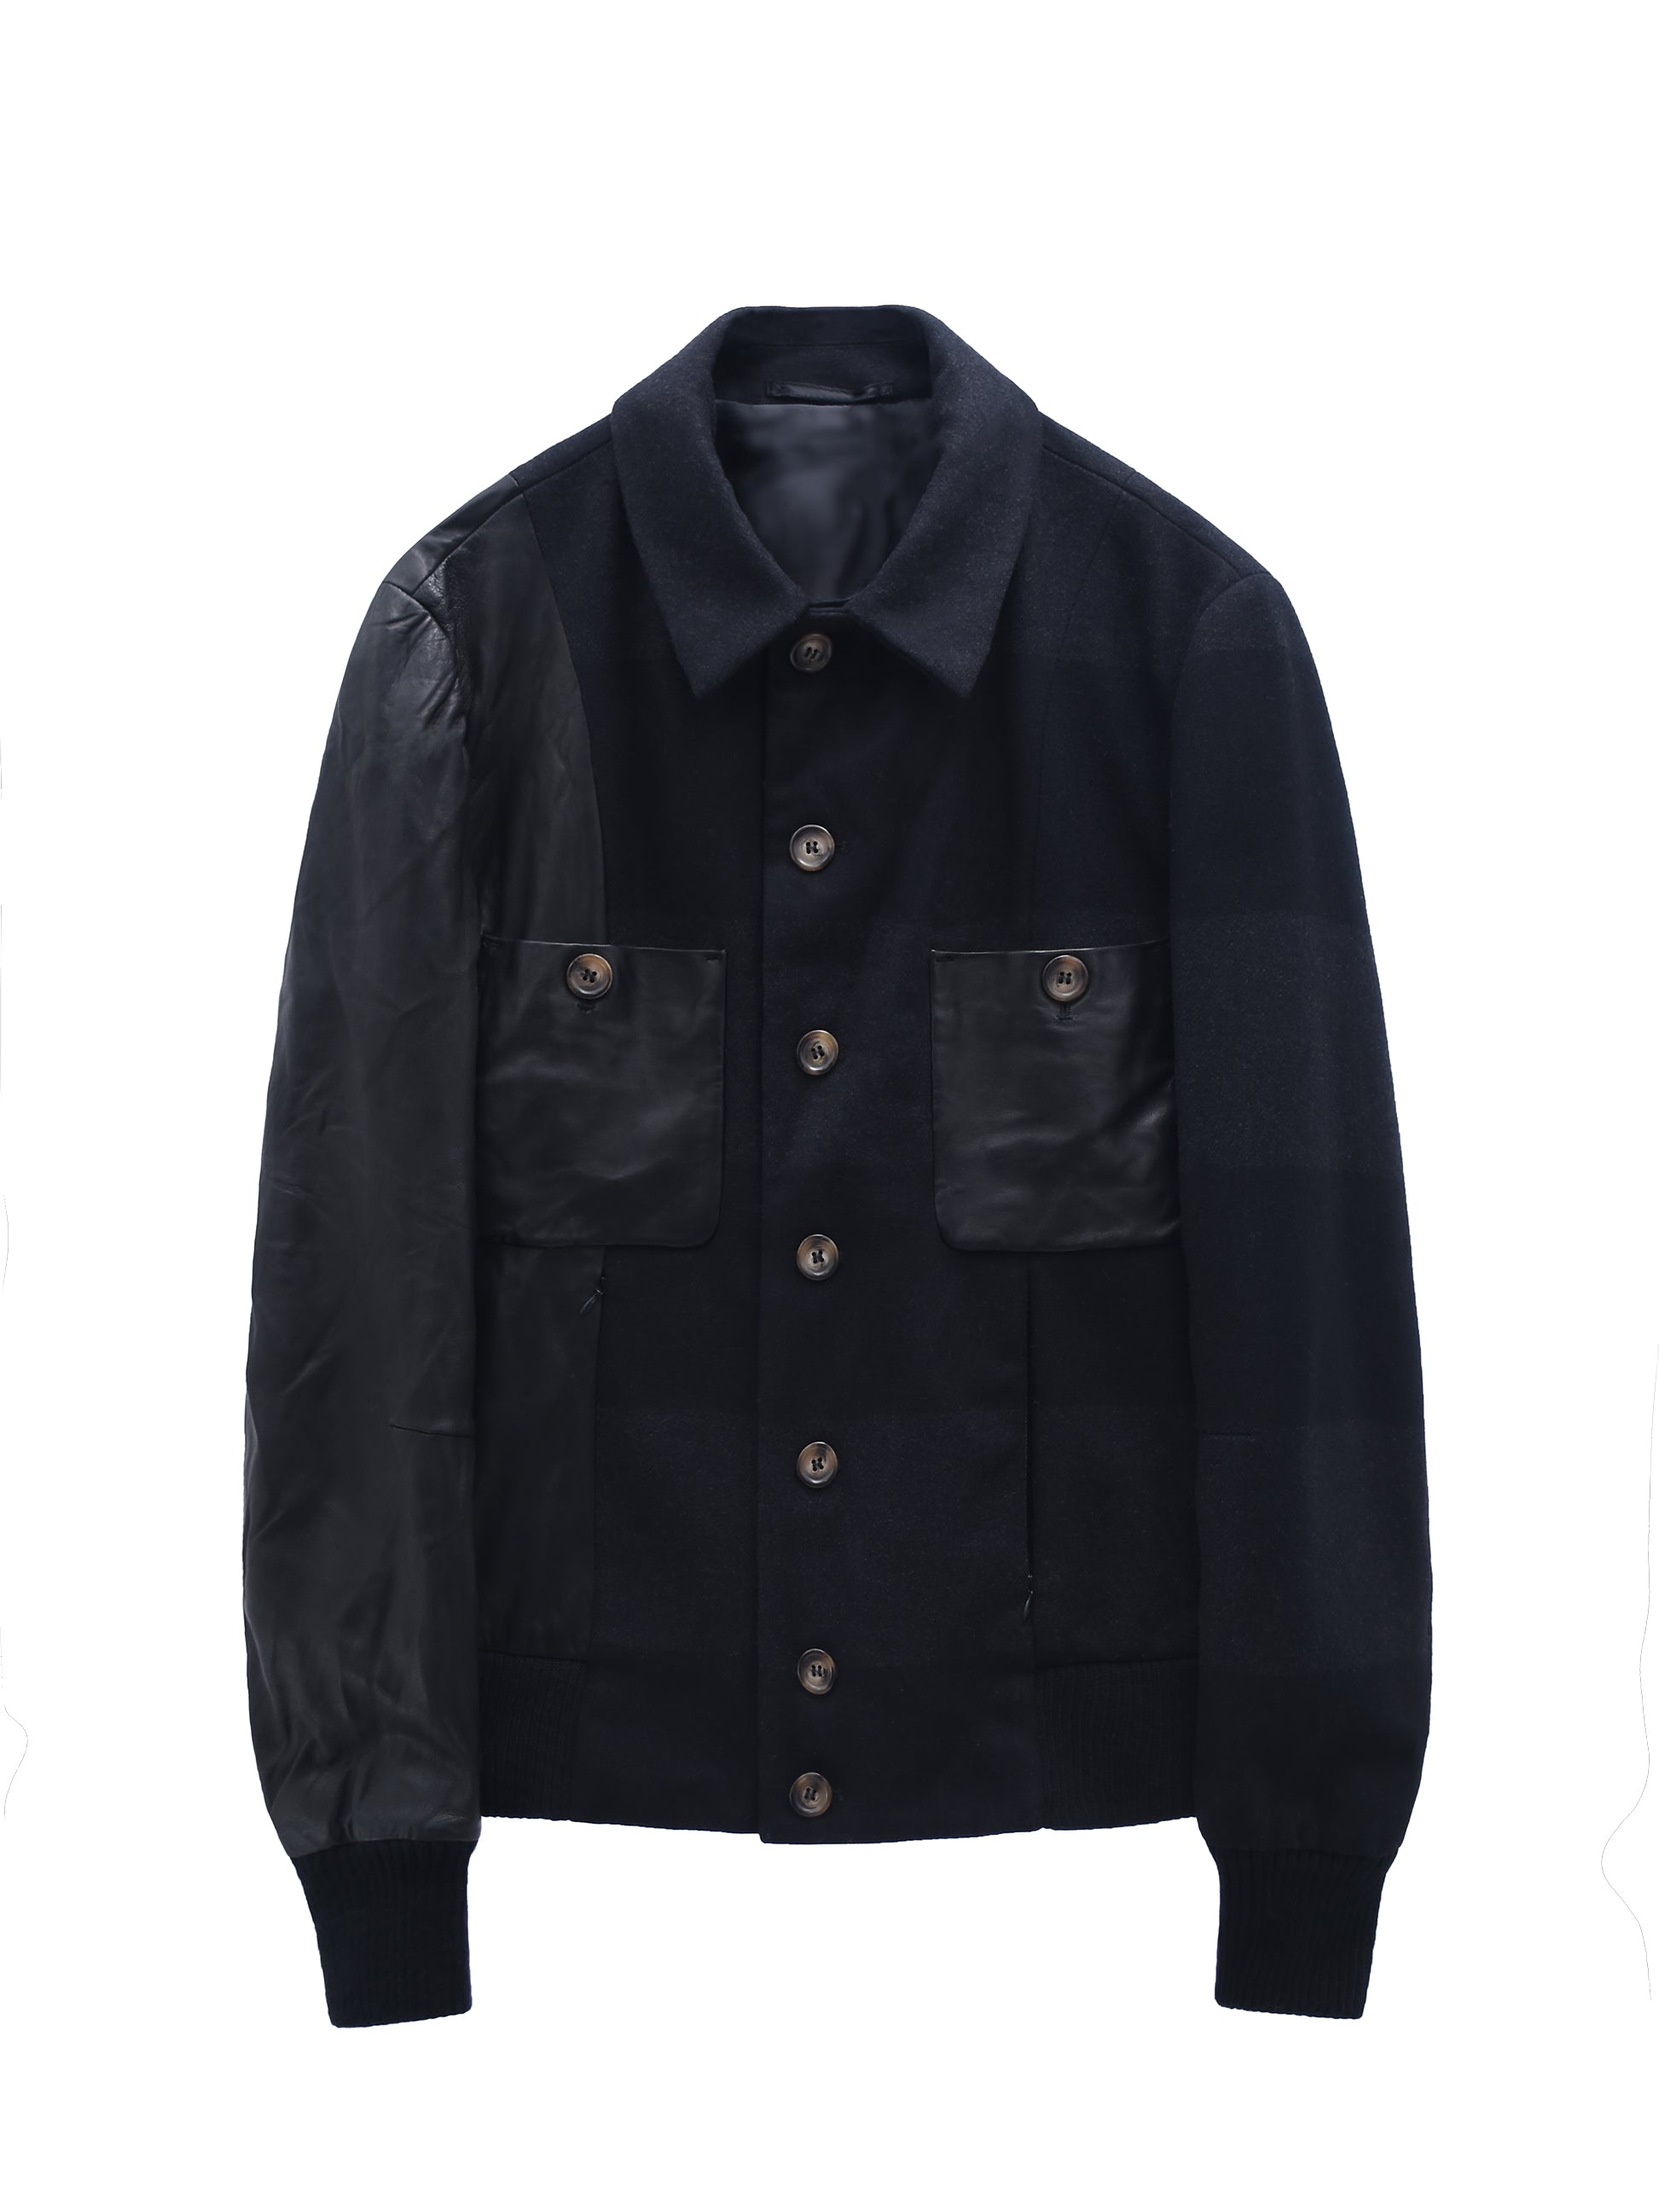 THE TUBE BLACK JACKET WITH PAPER LEATHER DETAILING